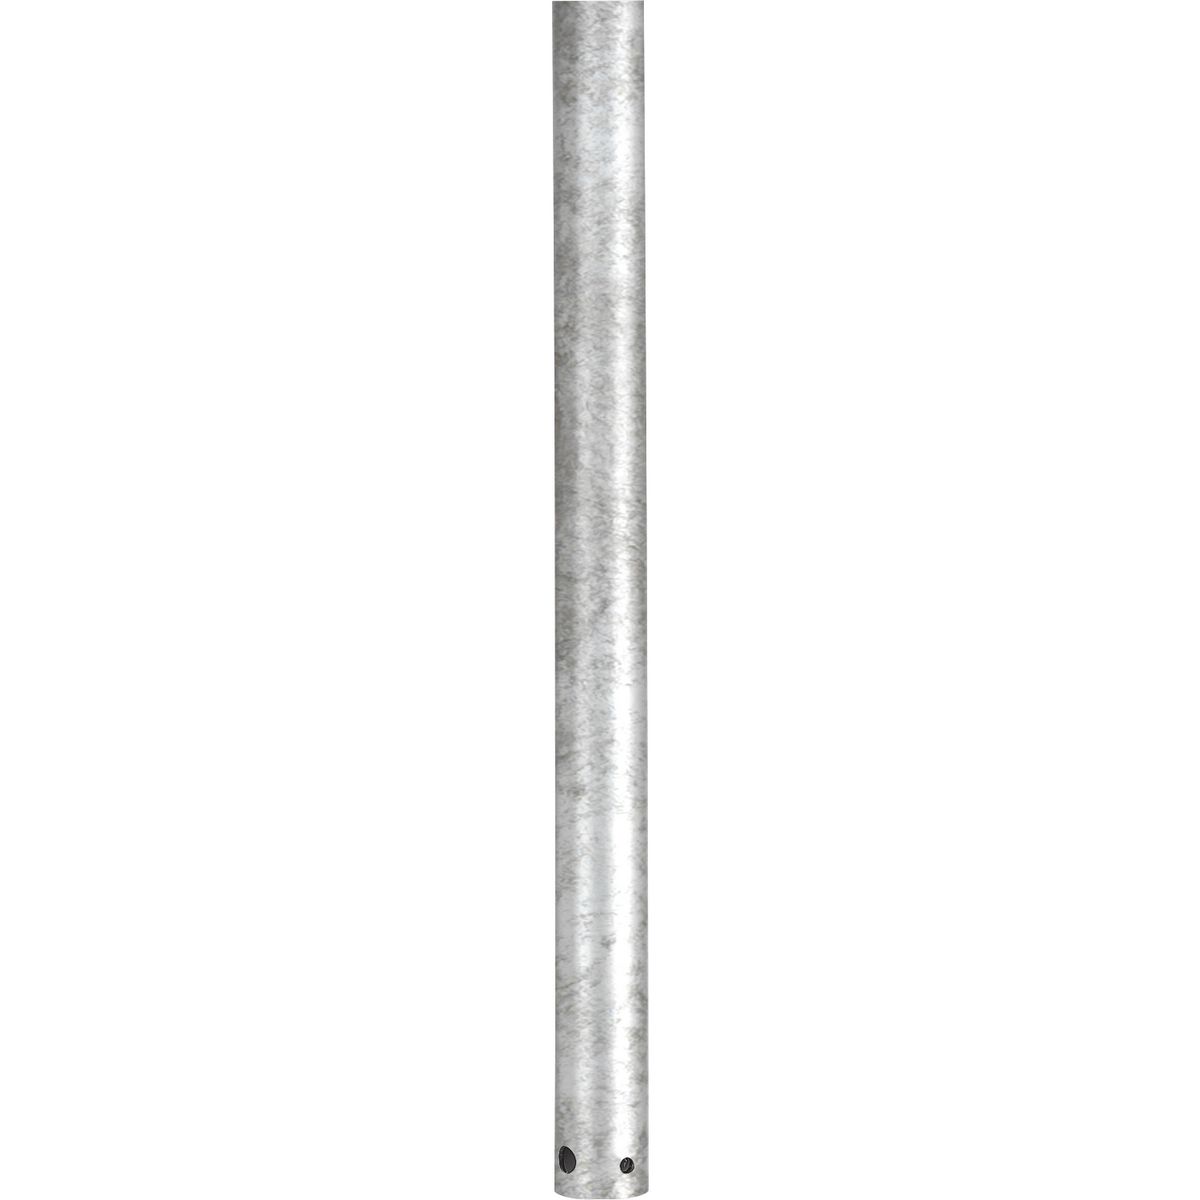 3/4 In. x 12 In. downrod for use with any Progress Lighting ceiling fan. Use of a fan downrod positions your ceiling fan at the optimal height for air circulation and provides the perfect solution for installation on high cathedral ceilings or in great rooms. Refer to the selection guide for recommended downrod lengths based upon your ceiling height. Galvanized Finish.